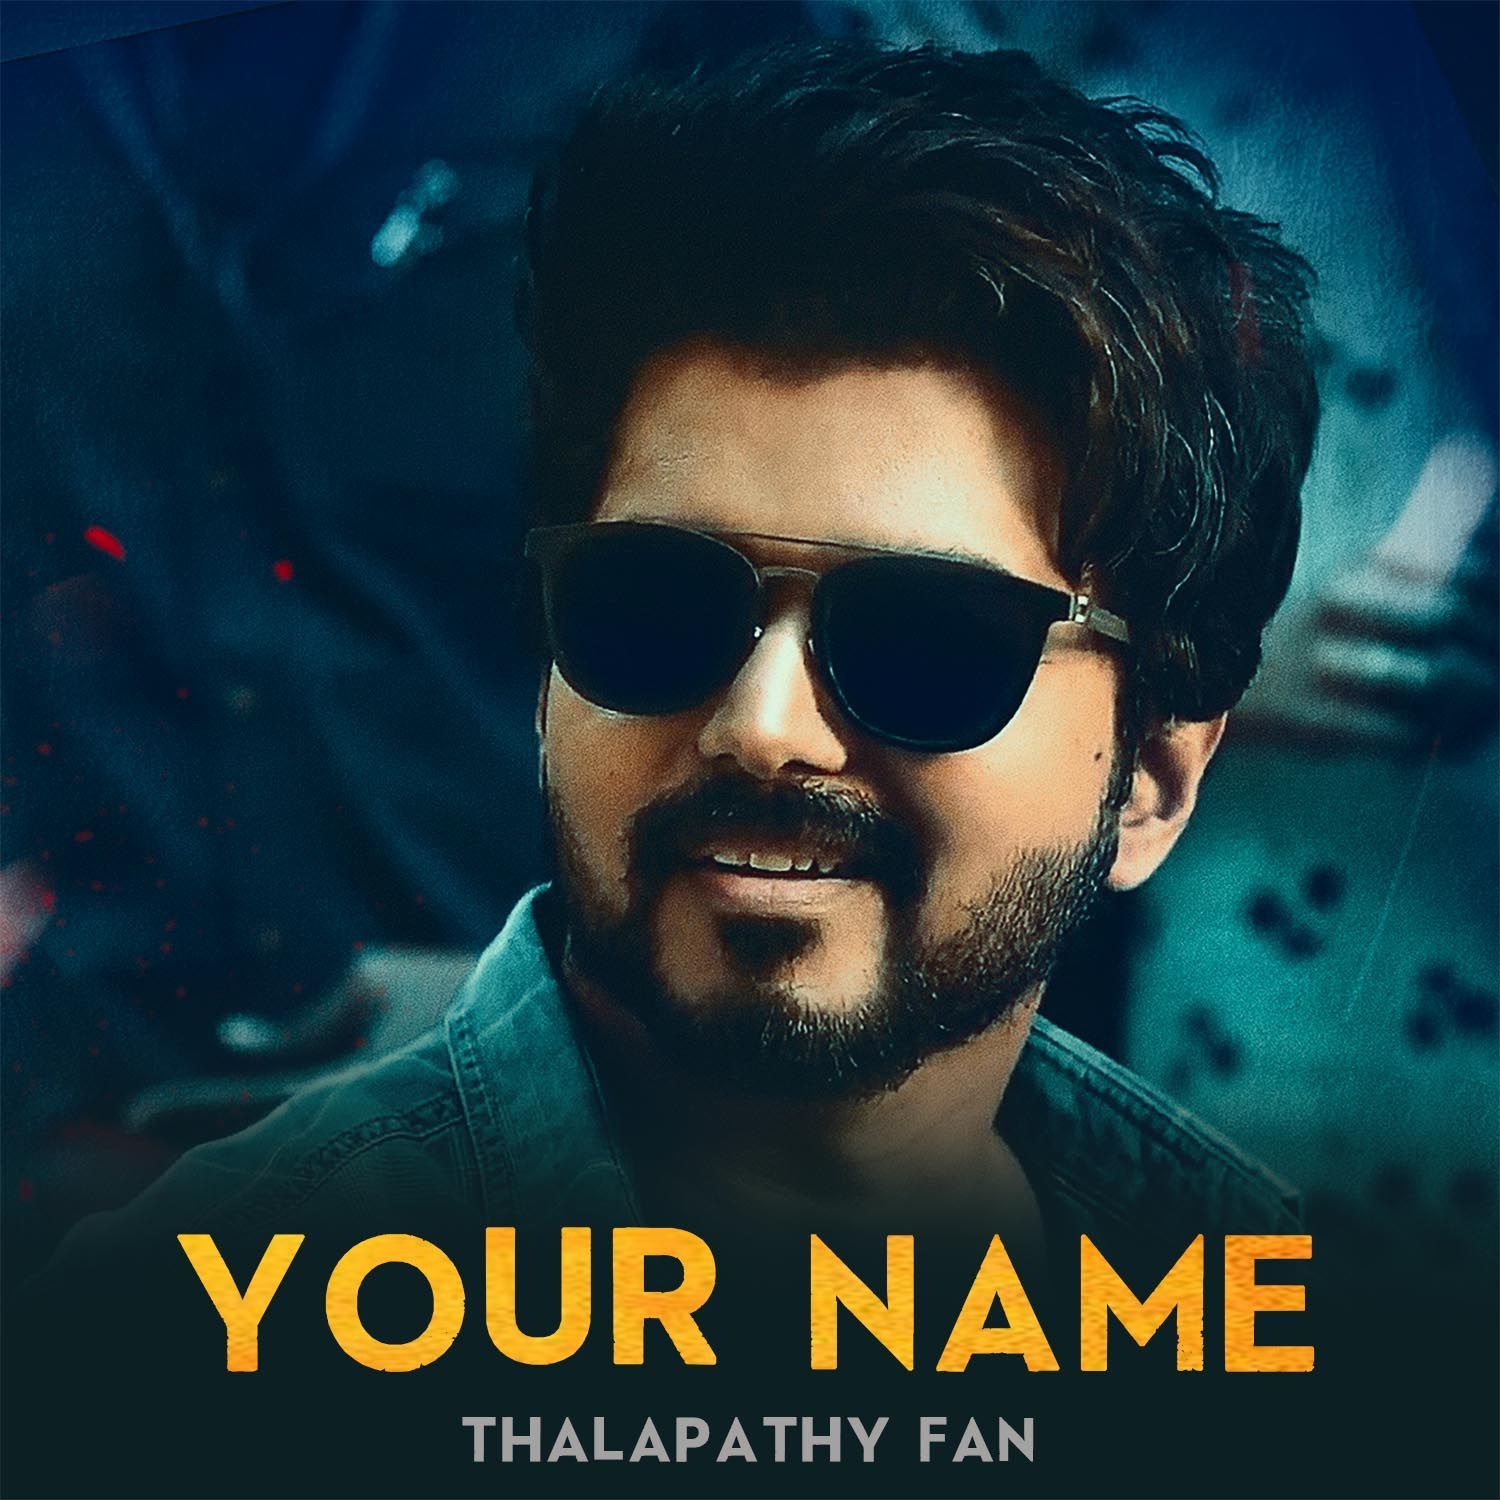 Vijay Movie Font Generator Liker.in. Font generator, Best movie posters, Actor picture